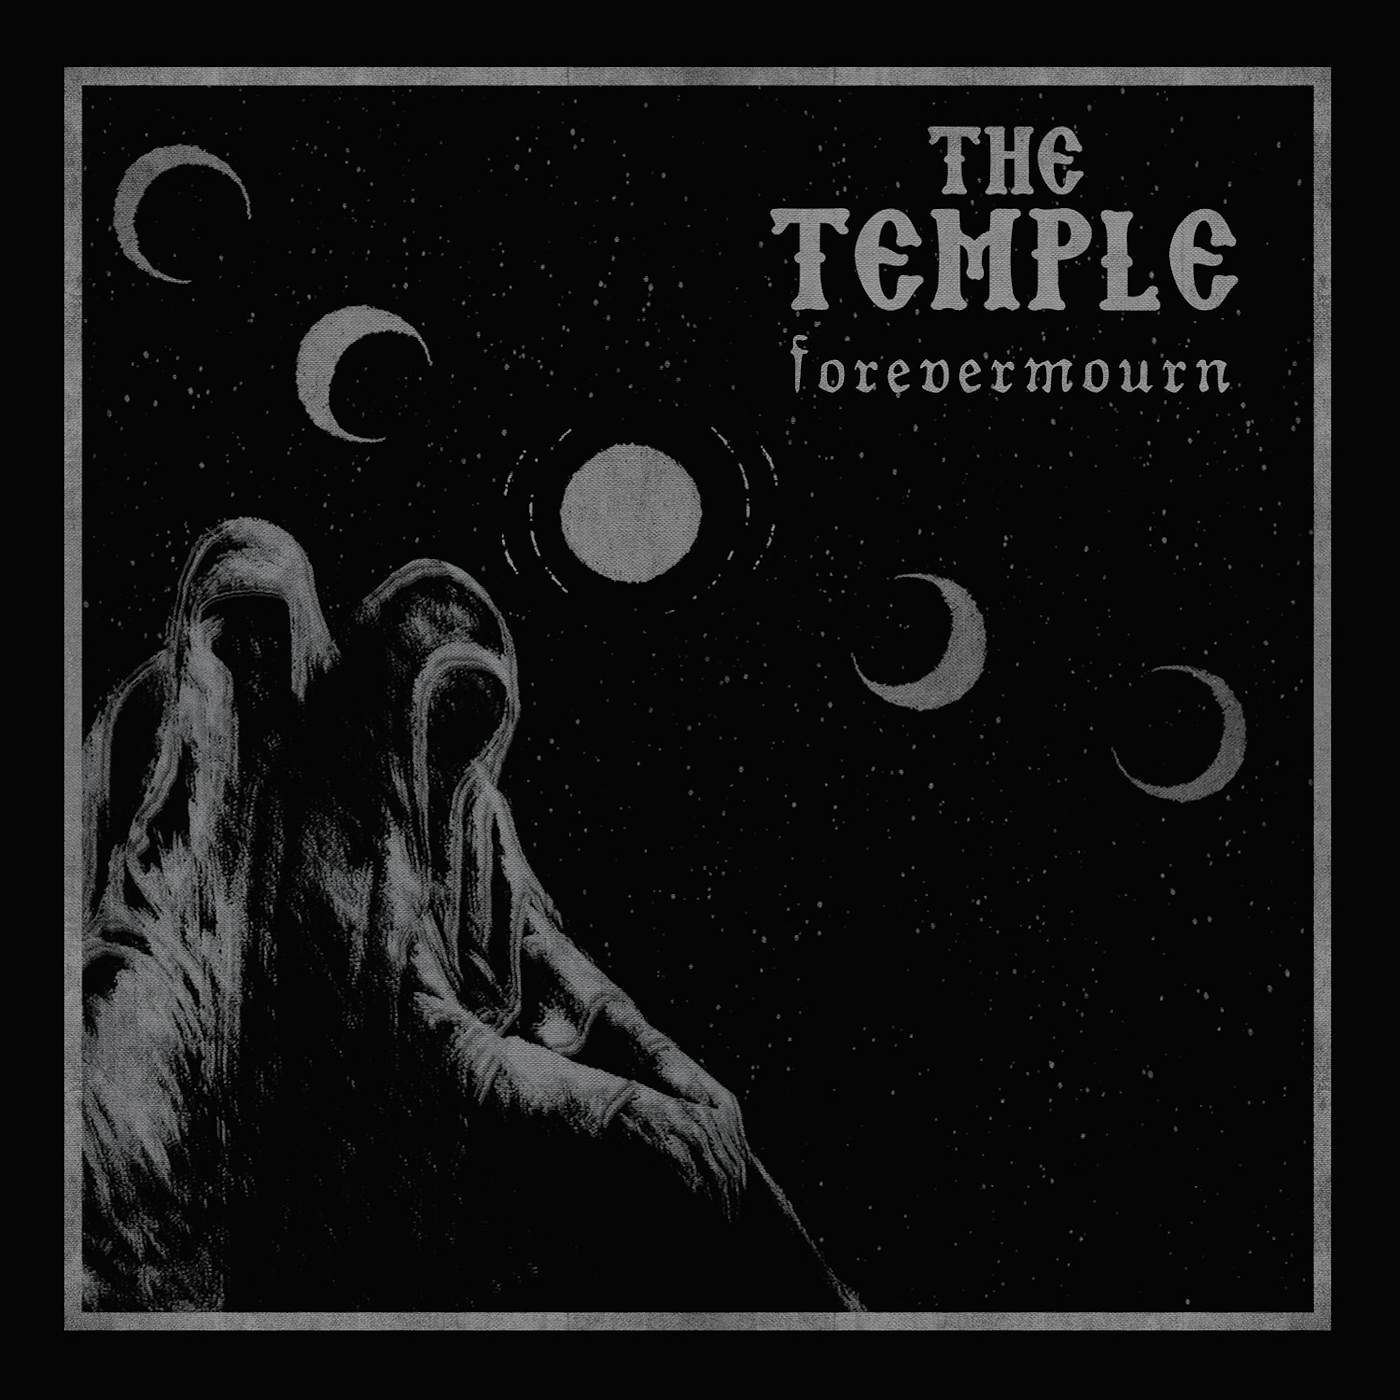 Temple Forevermourn Vinyl Record